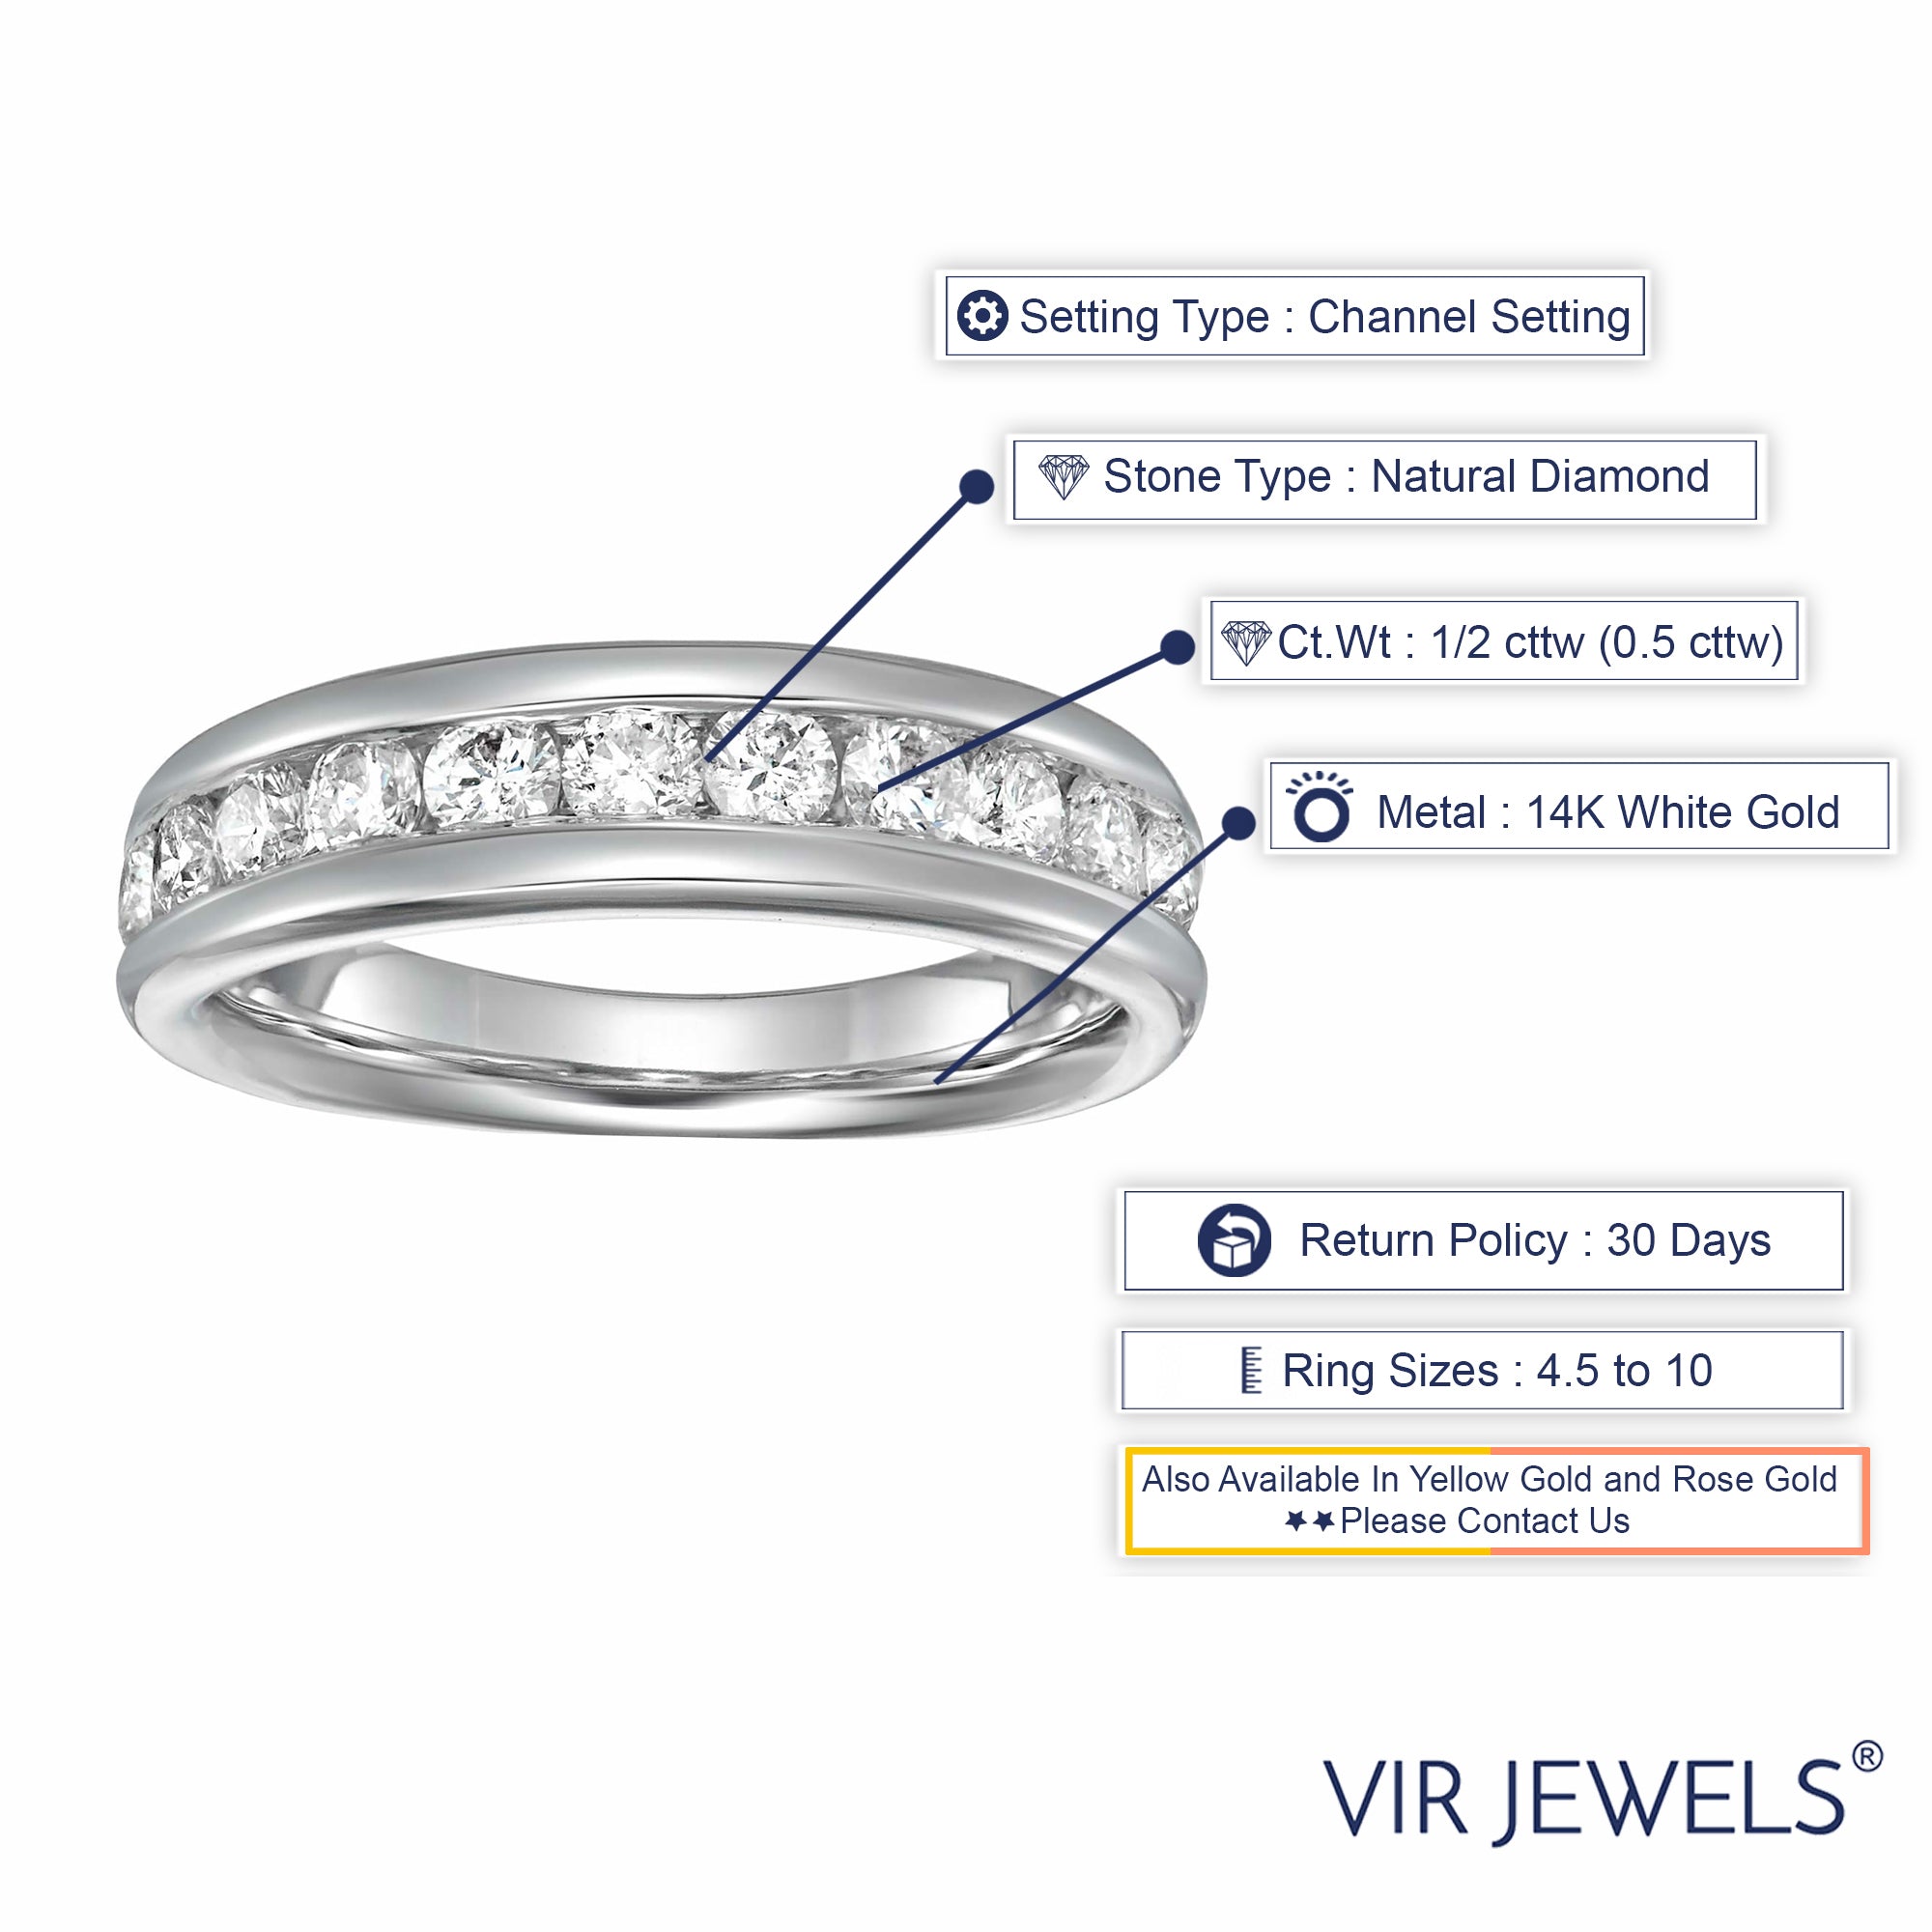 1/2 cttw Diamond Wedding Band for Women, Comfort Fit Diamond Wedding Band in 14K White Gold Channel Set, Size 4.5-10